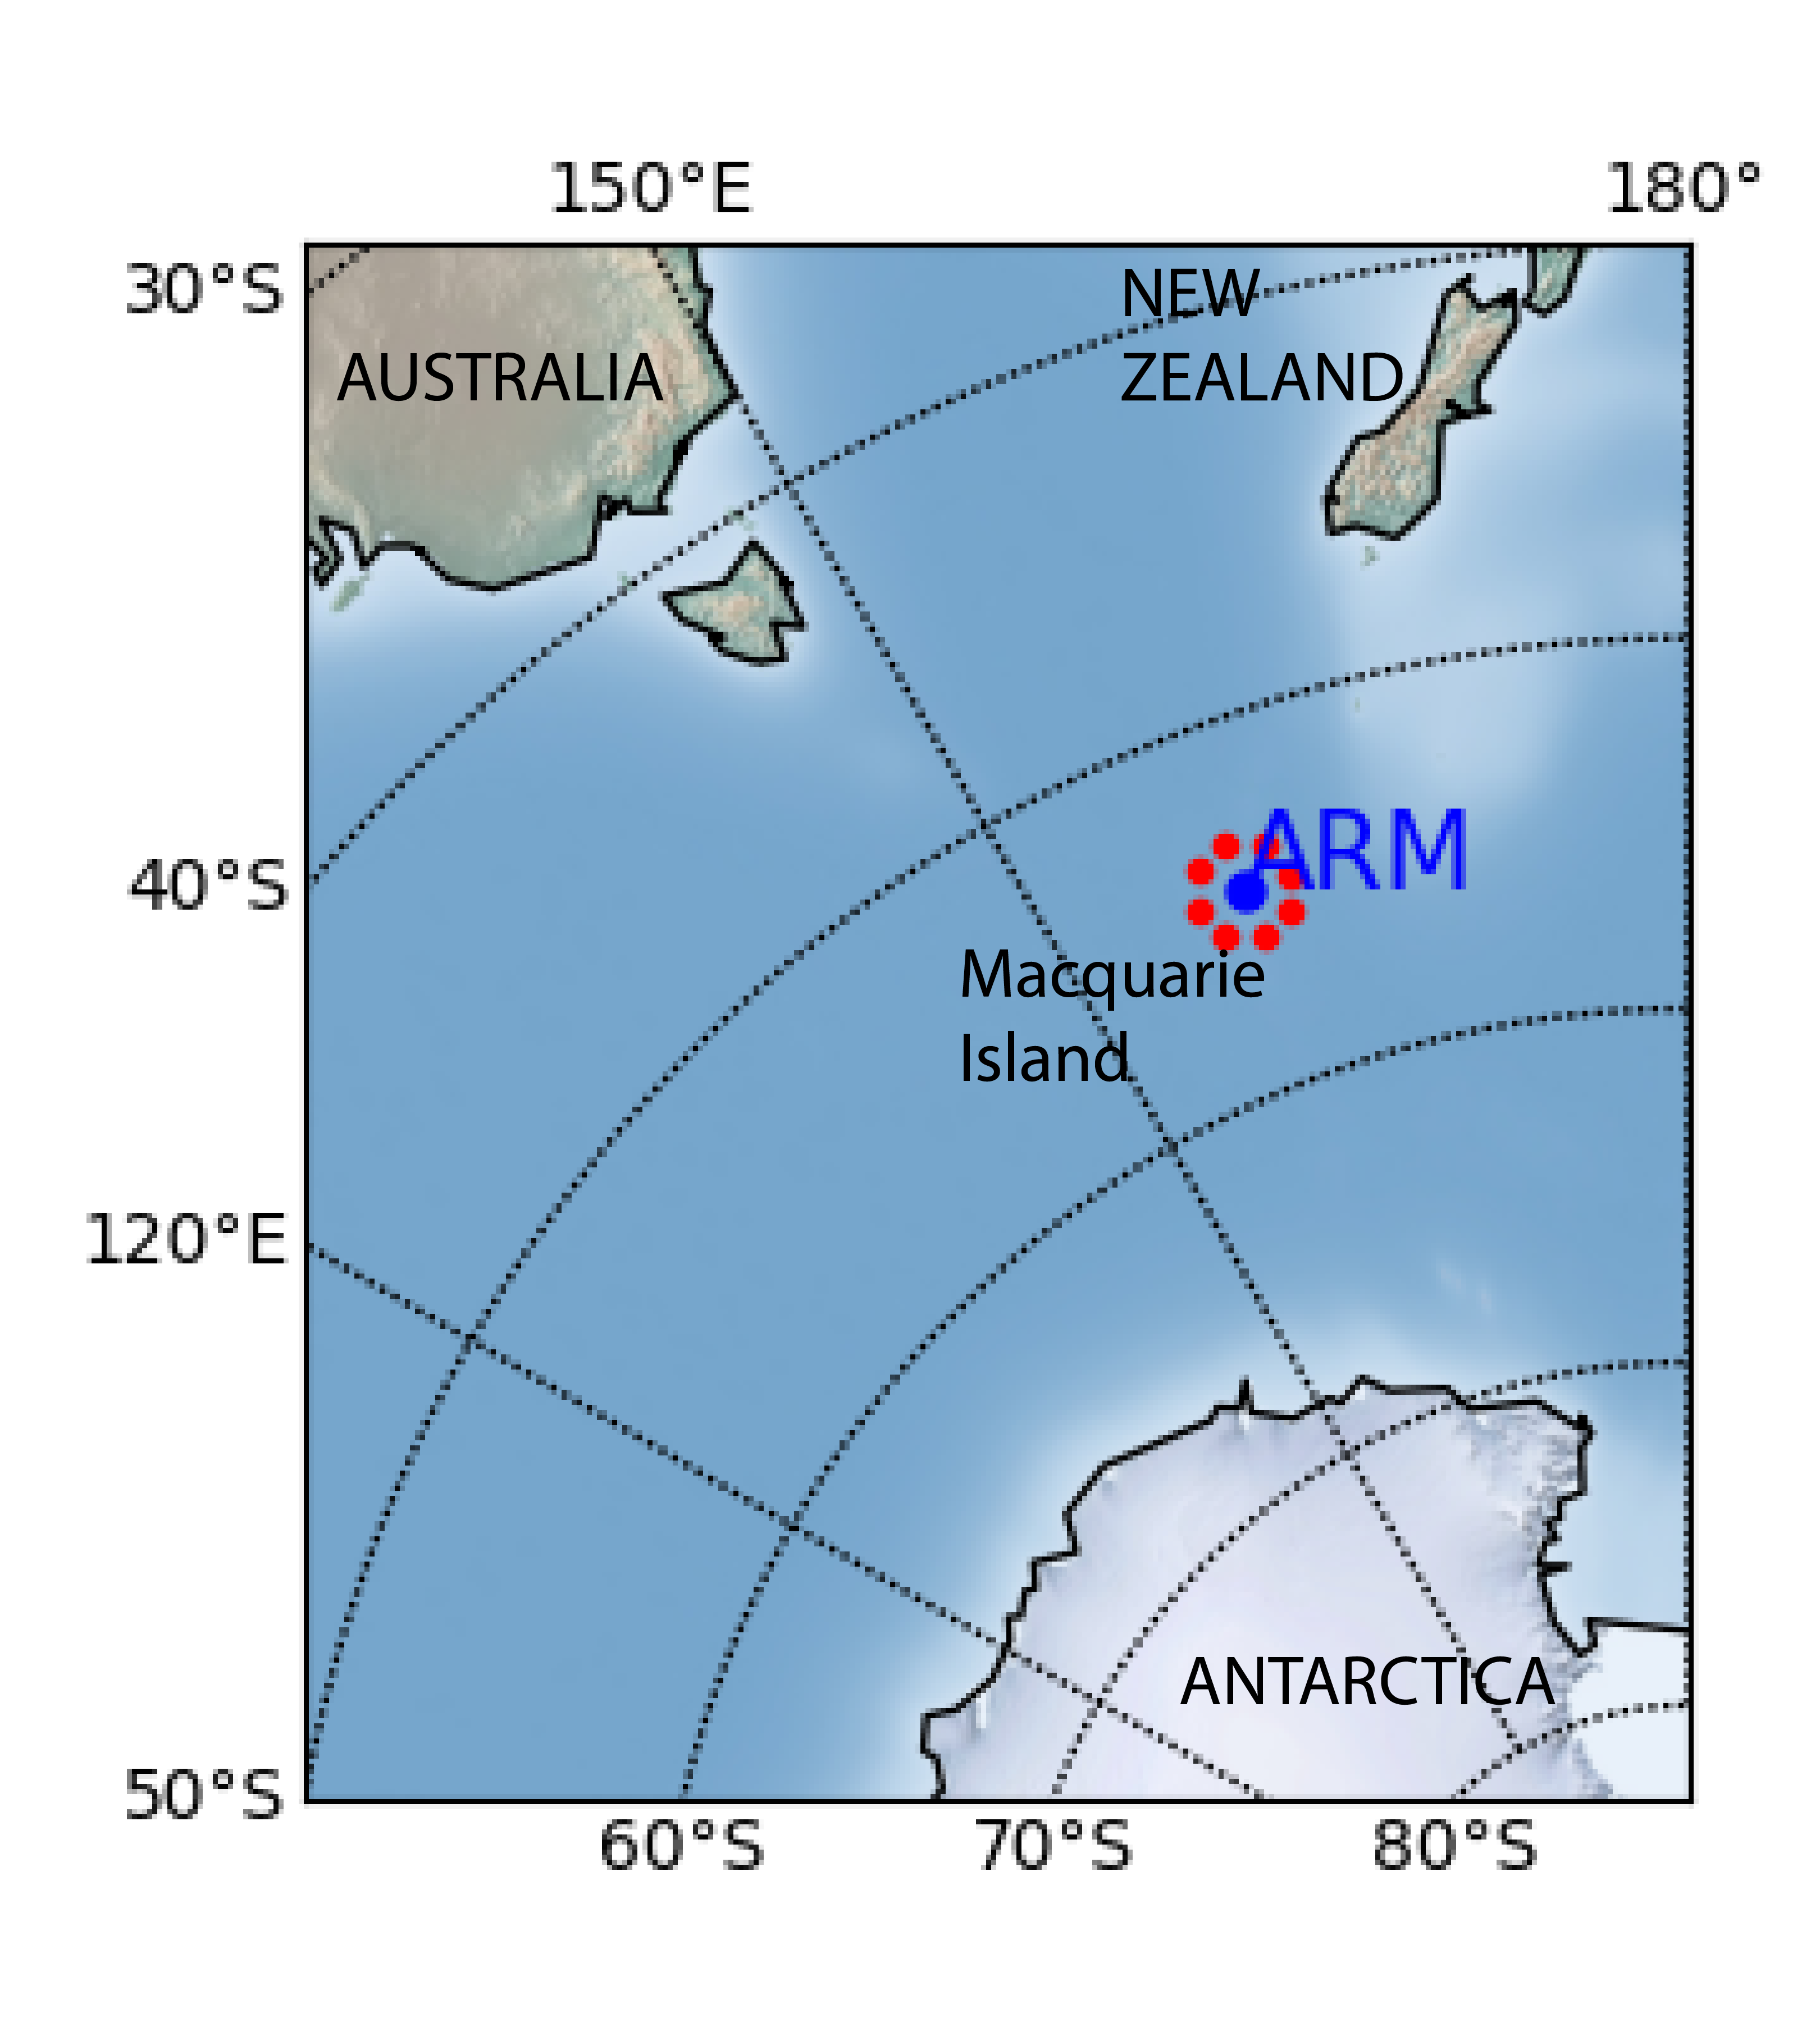 A map shows the ARM site on Macquarie Island between Australia, New Zealand, and Antarctica.